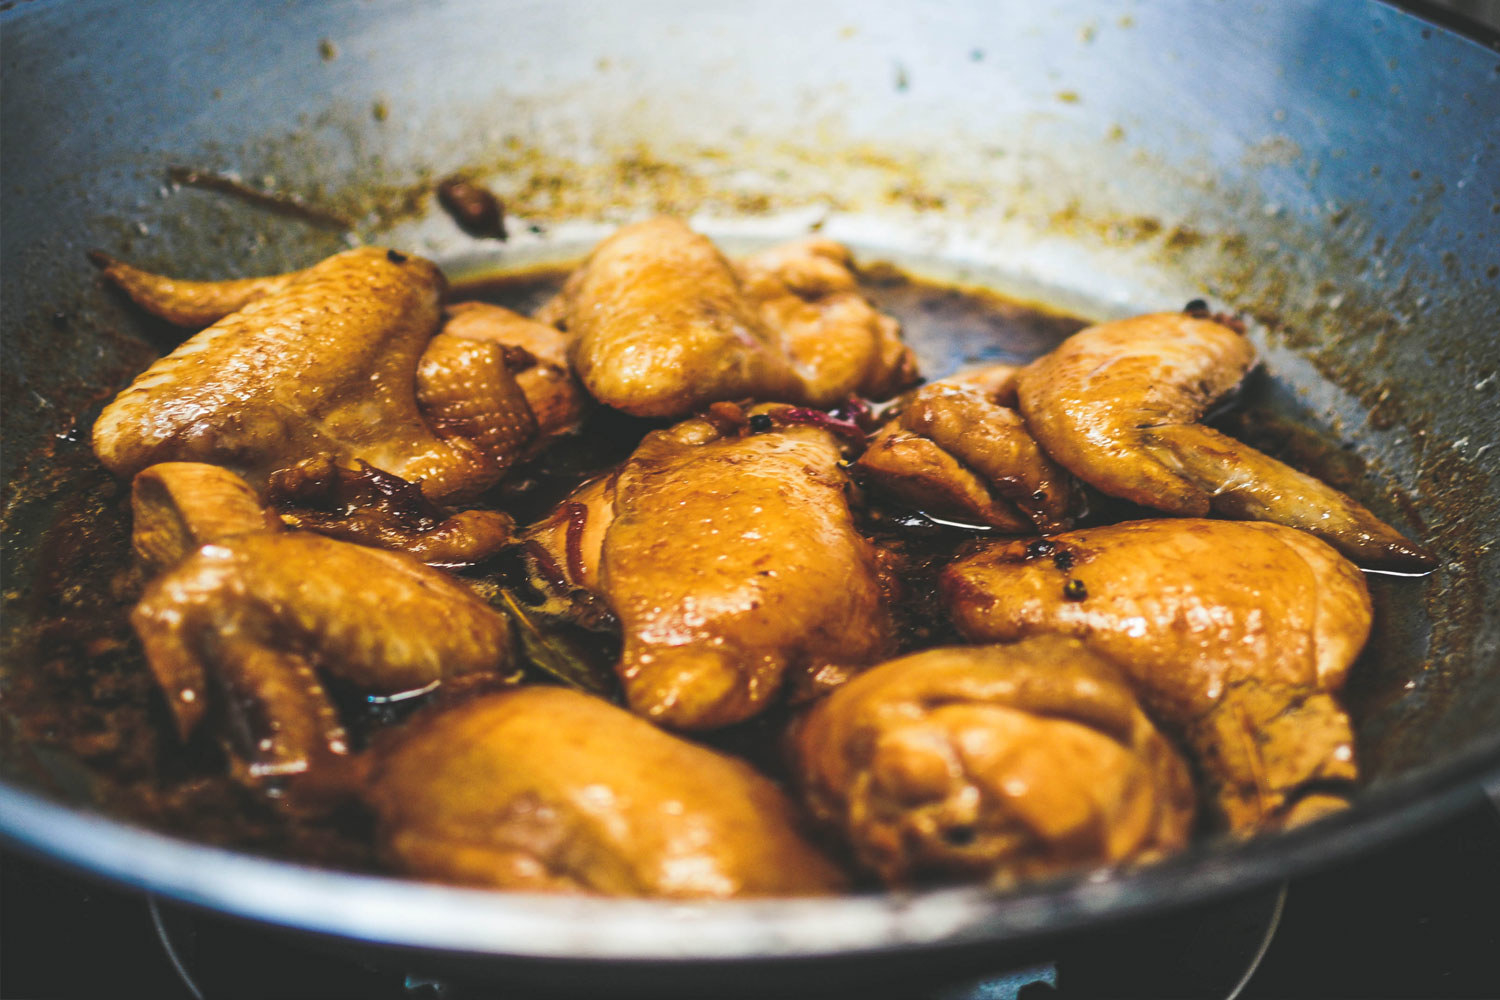 Cooking adobo chicken.